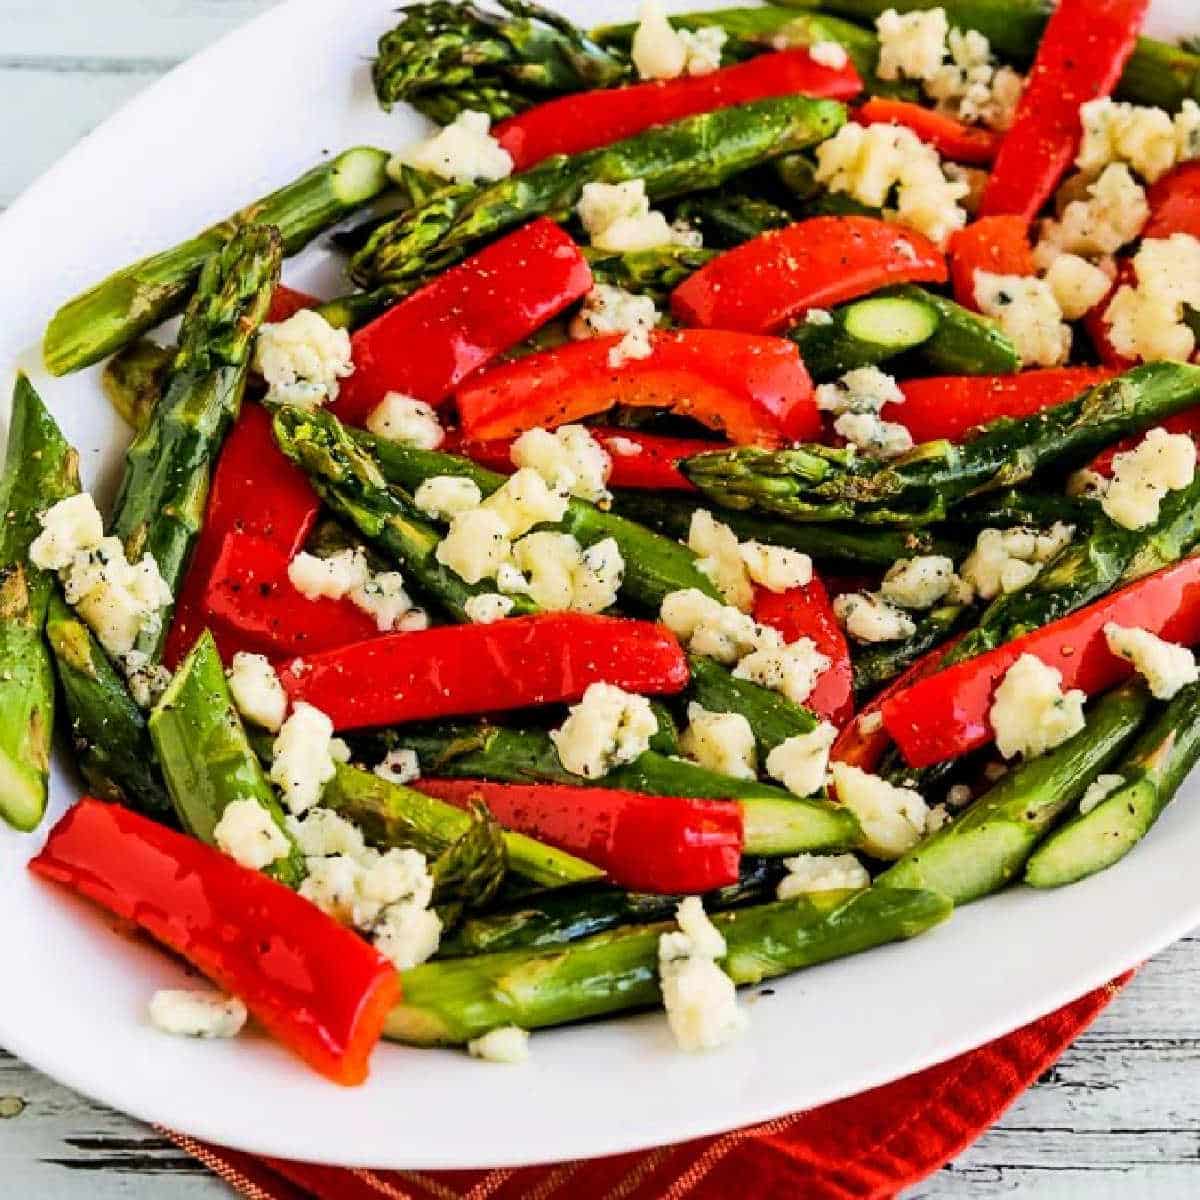 Square image of Roasted Asparagus and Peppers shown on serving platter, with crumbled Gorgonzola.